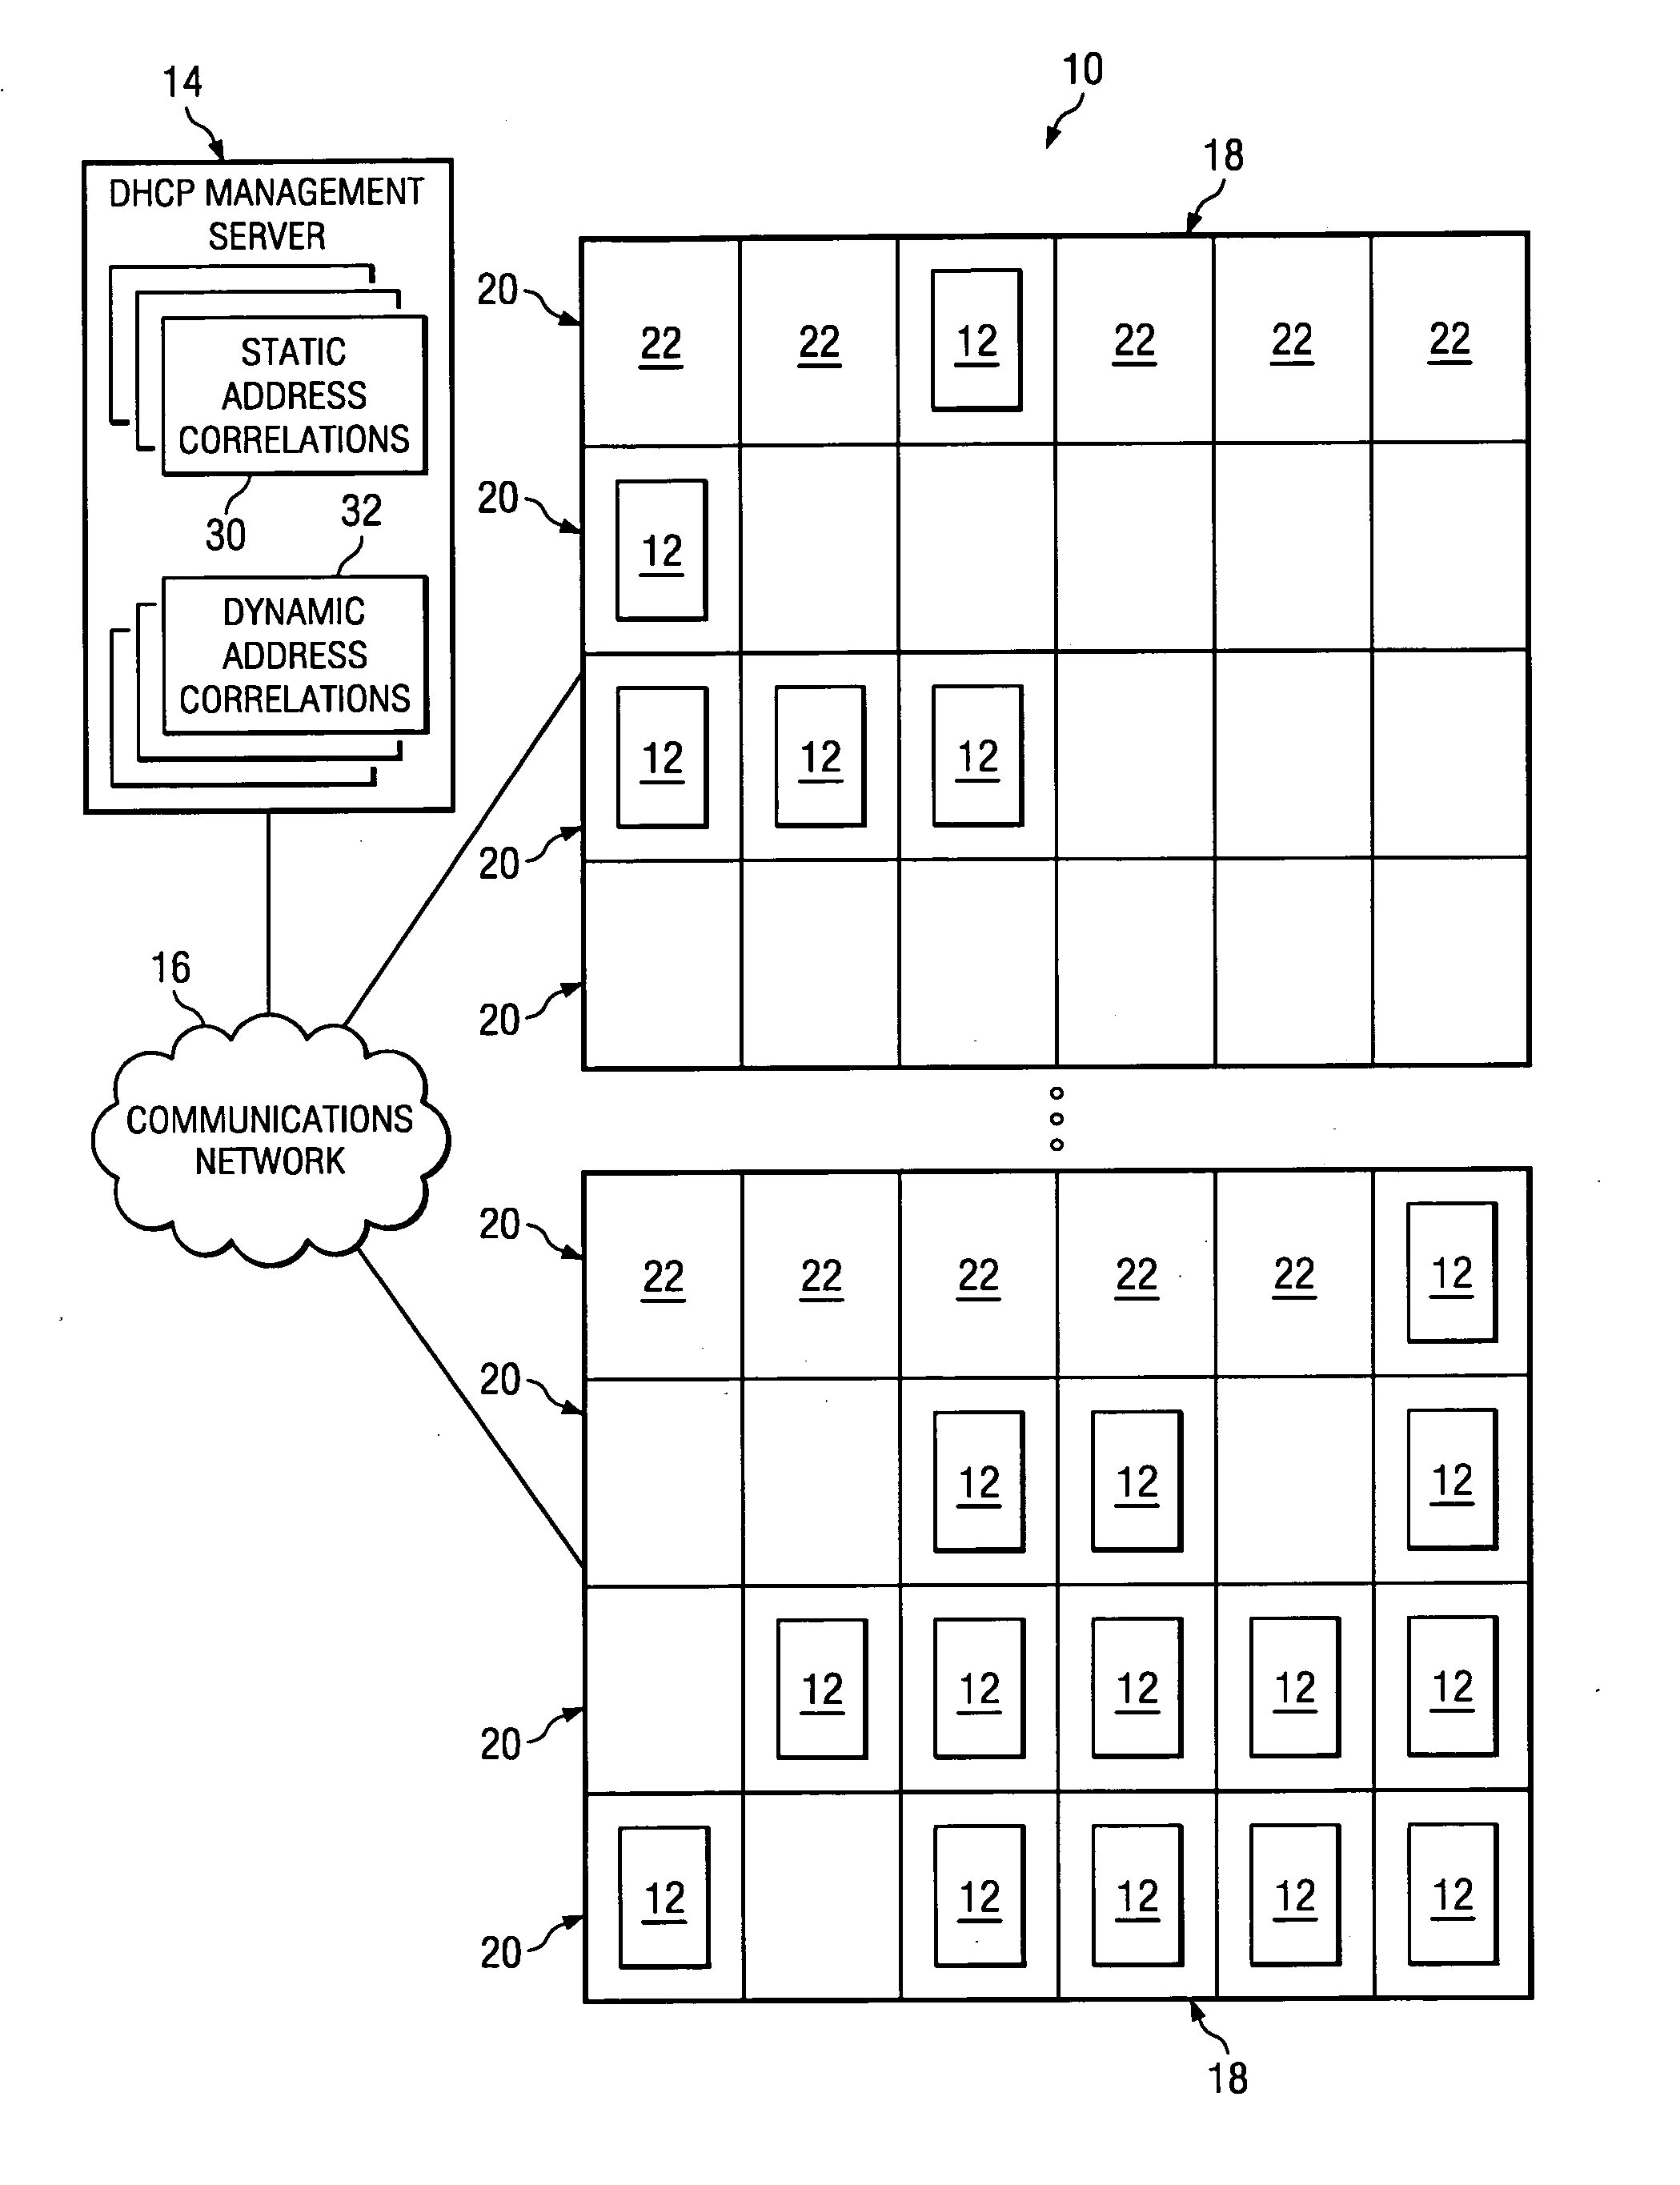 System and method for DHCP-based assignment of IP addresses to servers based on geographic identifiers